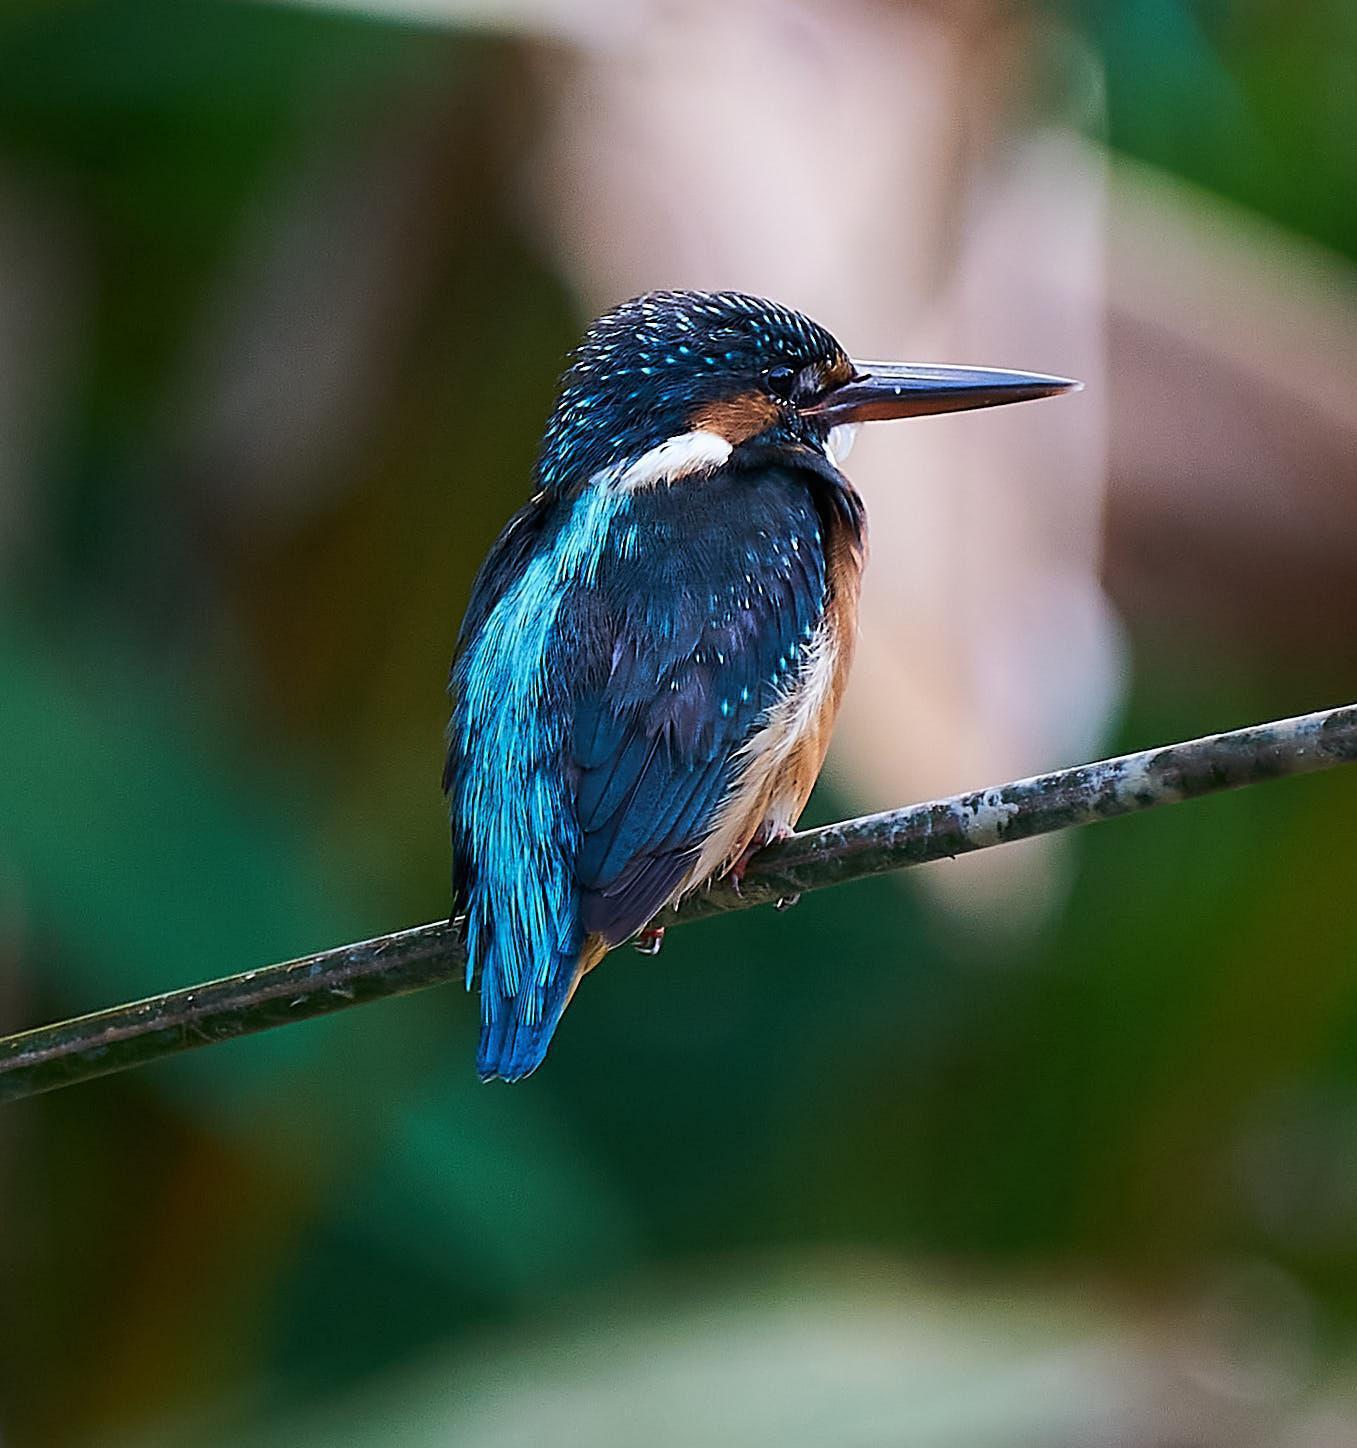 Common Kingfisher Photo by Steven Cheong